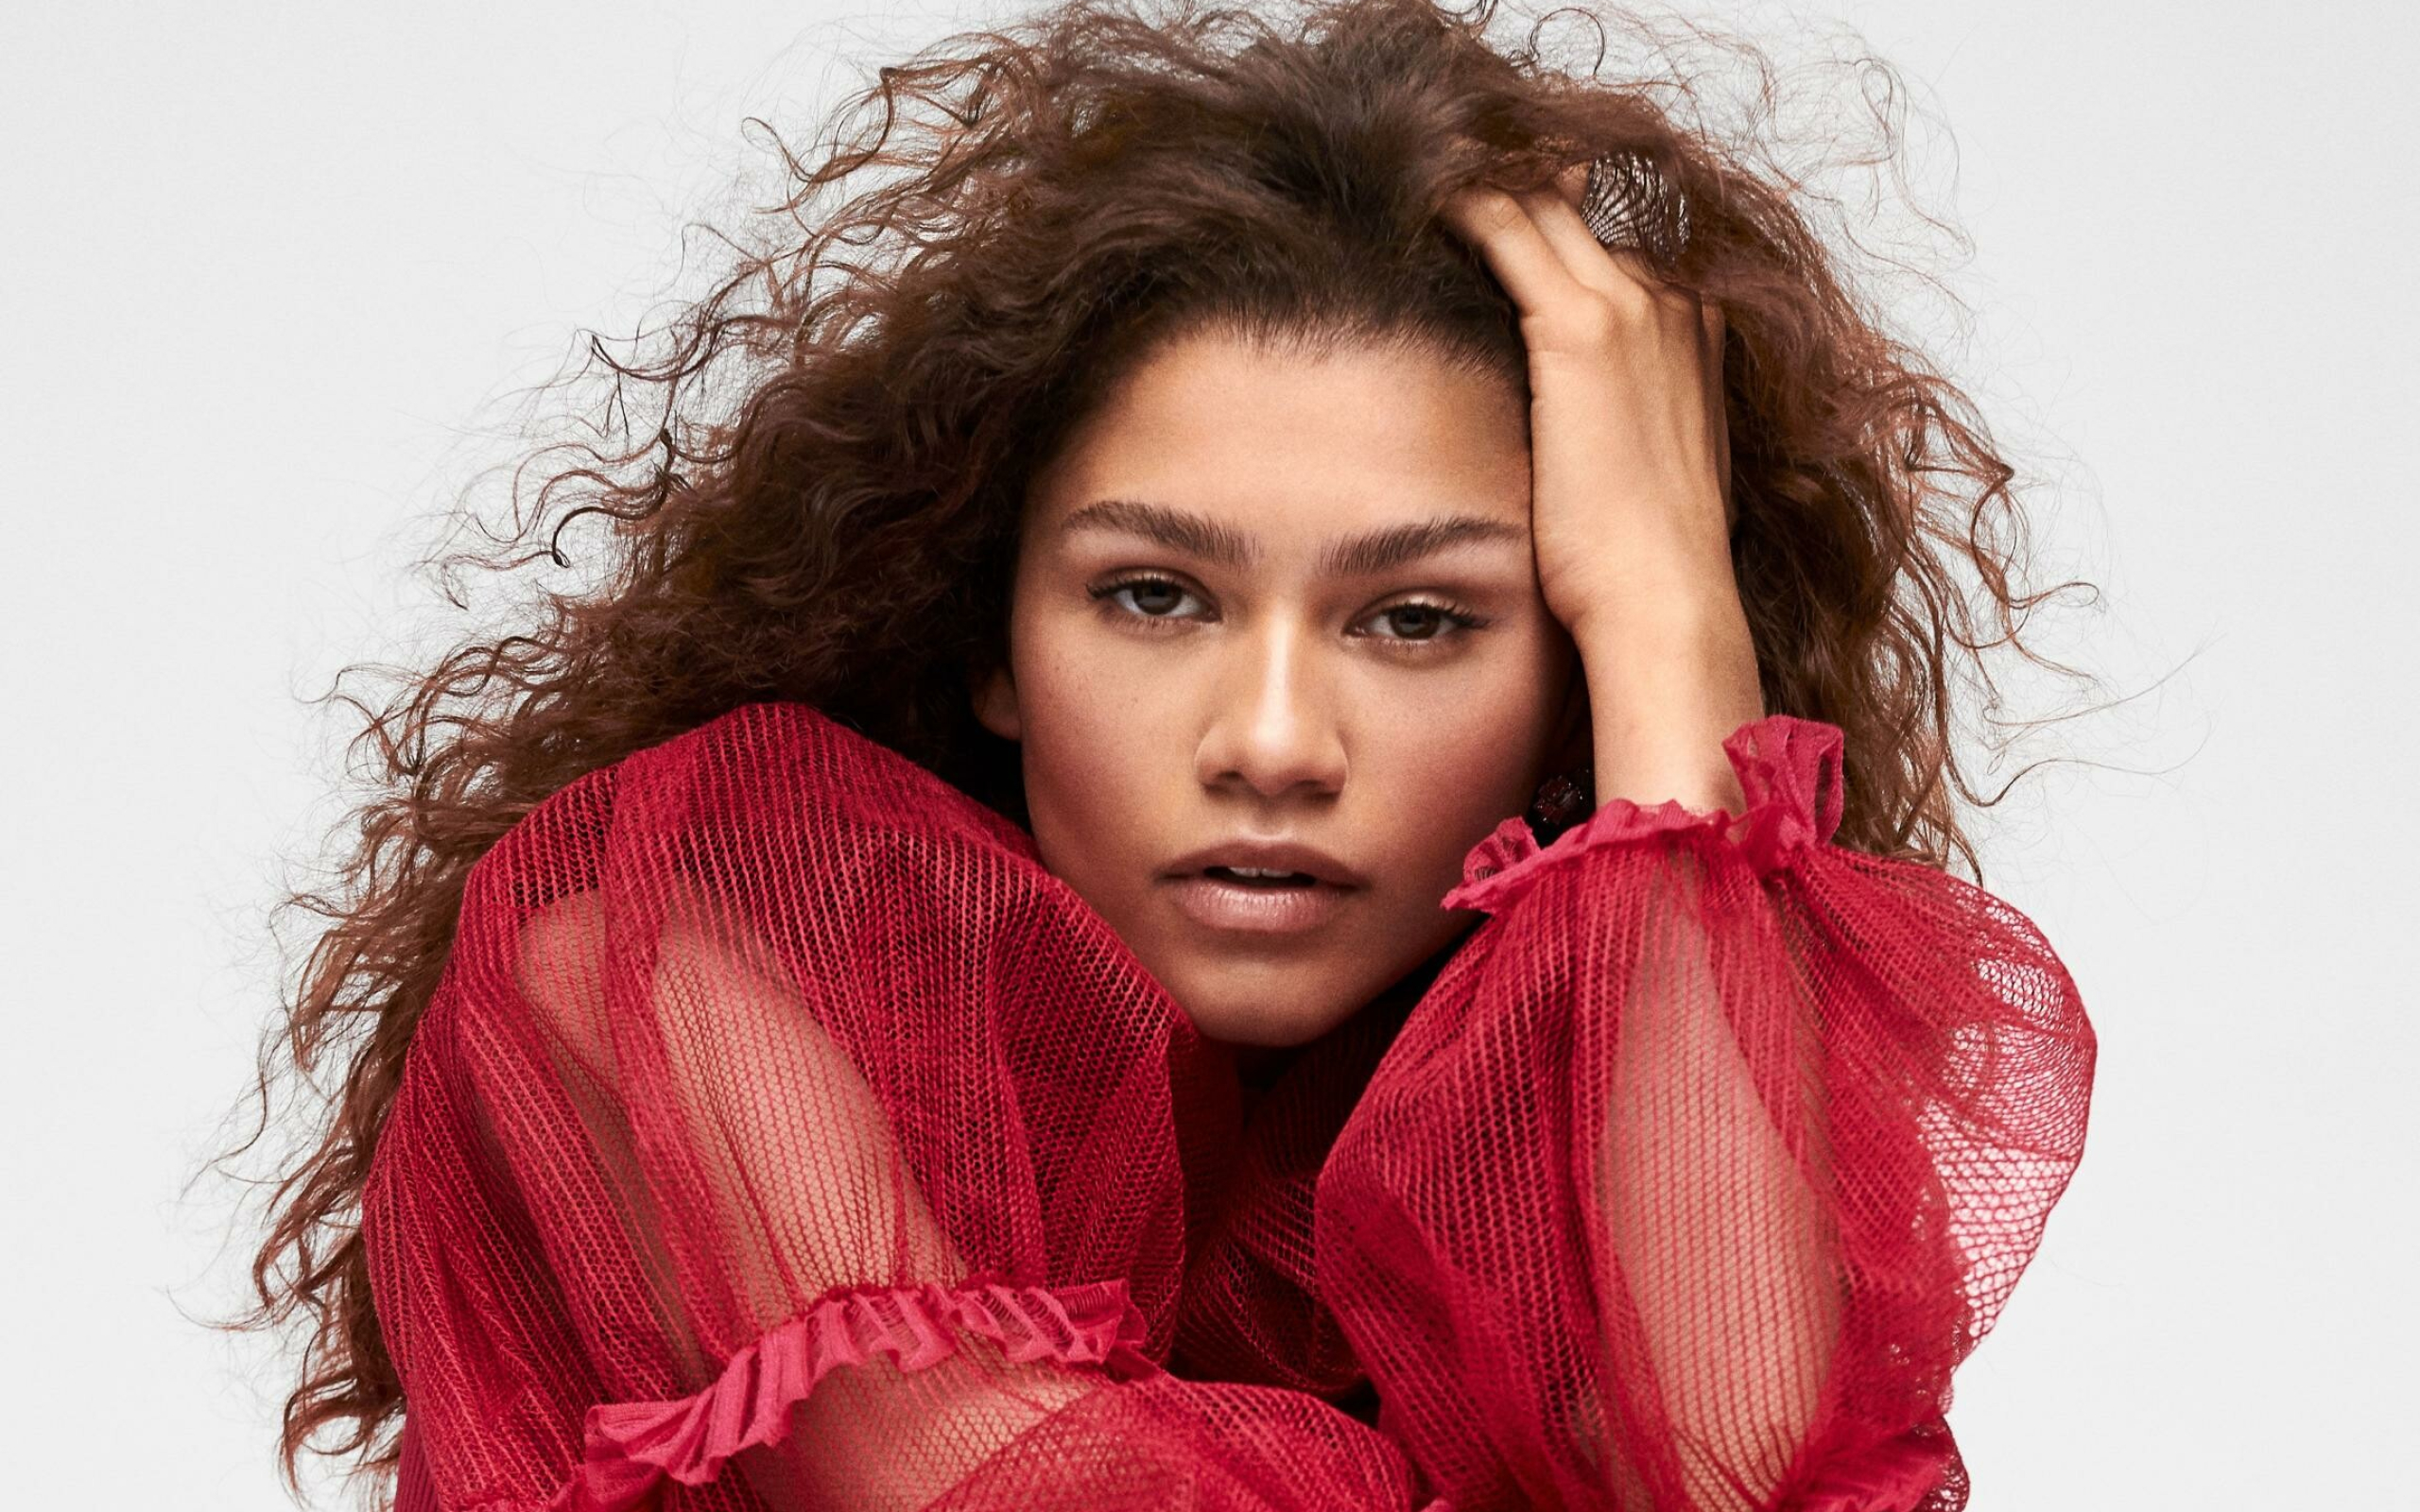 Zendaya: The youngest recipient of two Primetime Emmy Awards for Outstanding Lead Actress in a Drama Series. 2560x1600 HD Wallpaper.